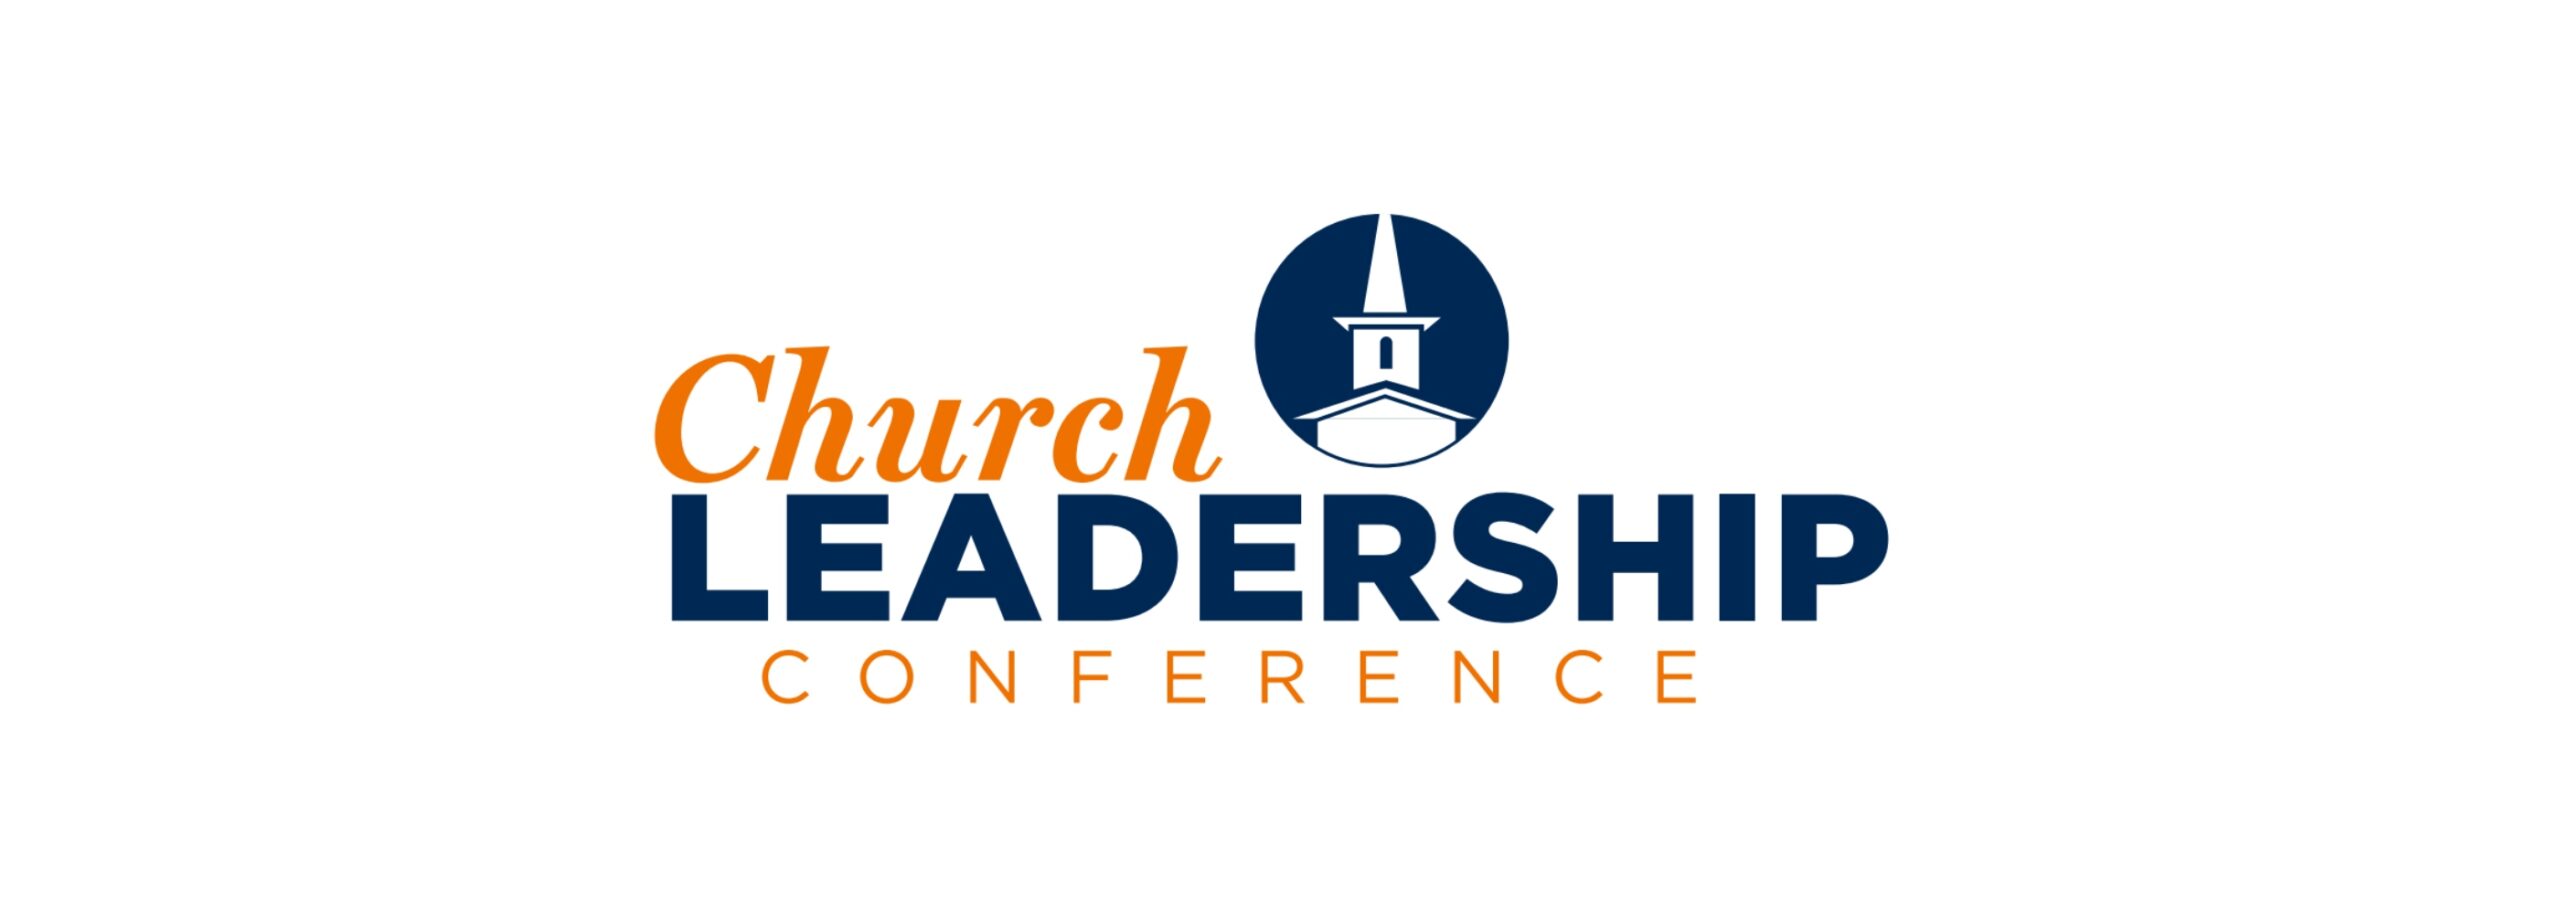 Church Leadership Conference